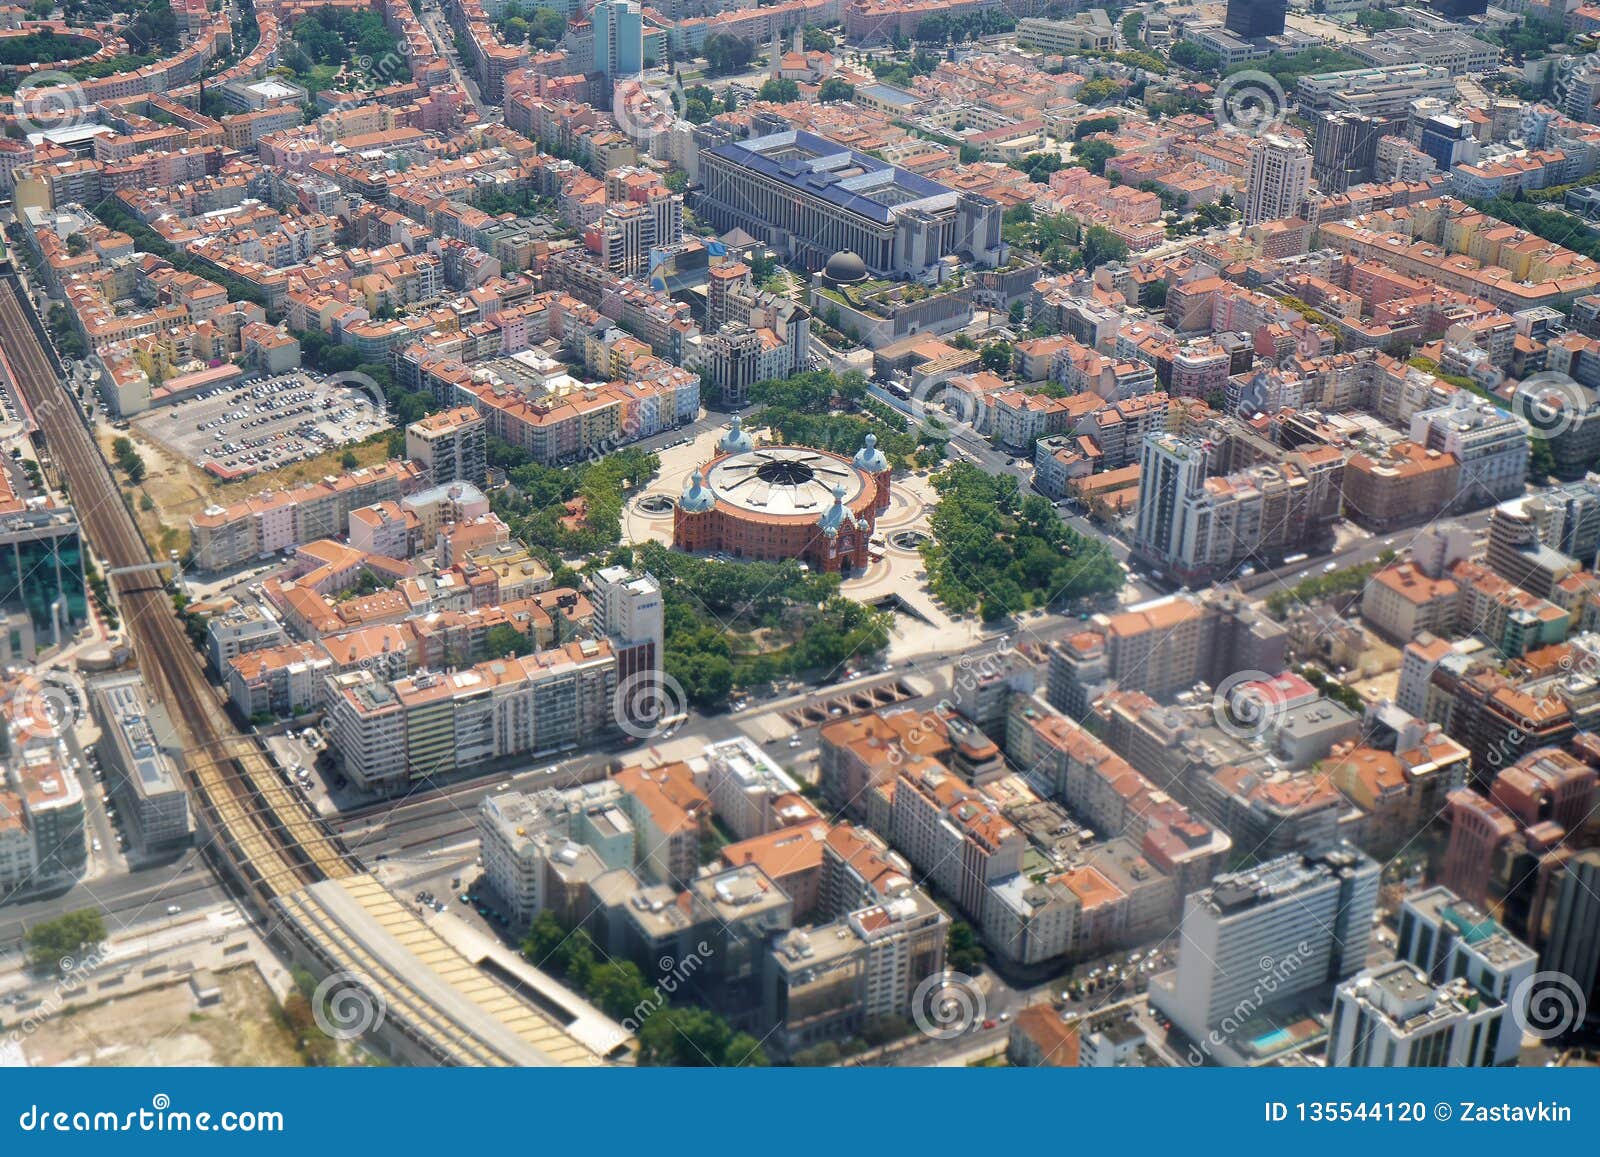 the air view of central lisbon with round building of centro comercial do campo pequeno. portugal